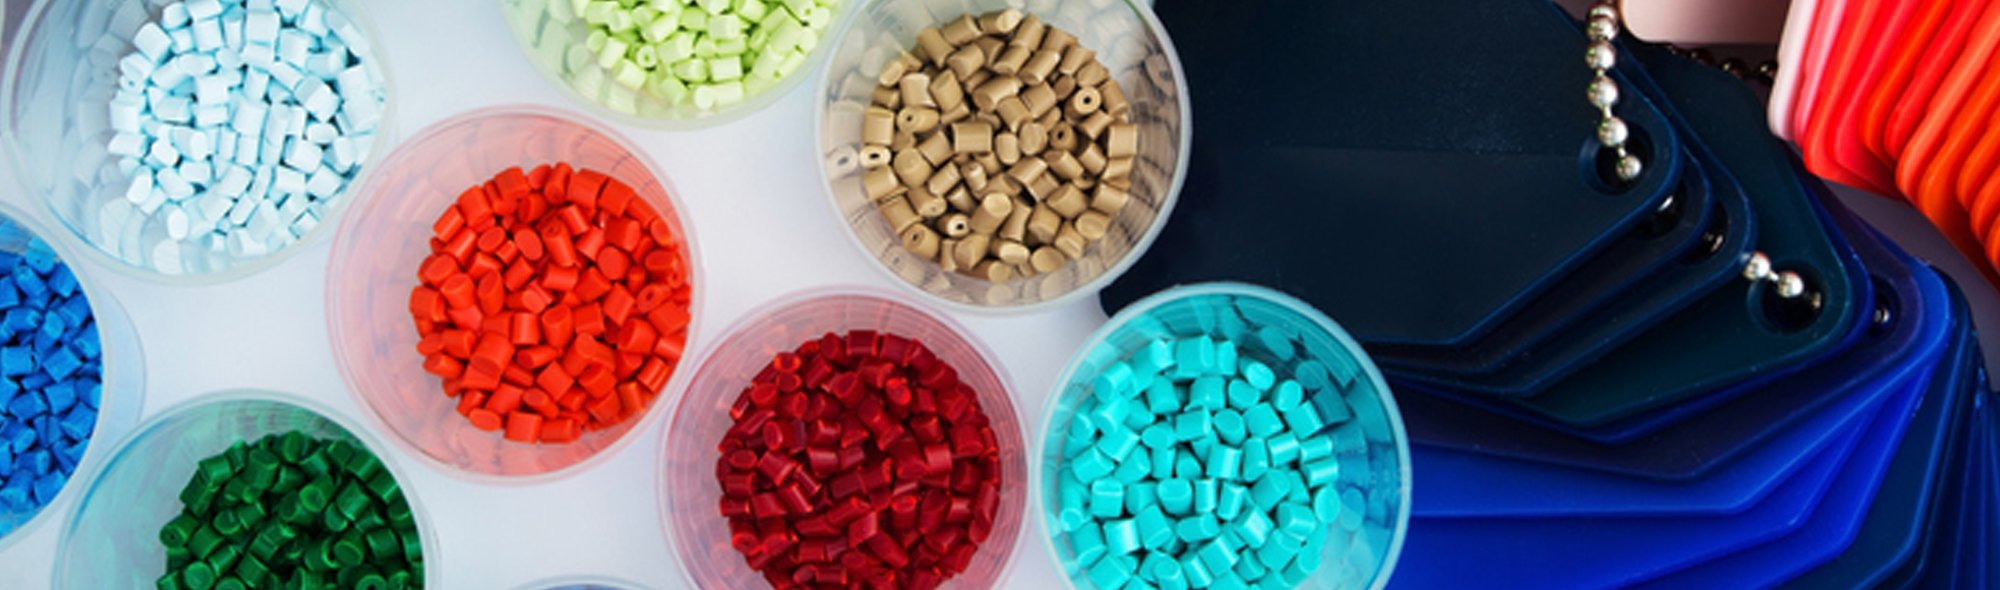 A close-up image of a variety of polymer resin pellets.